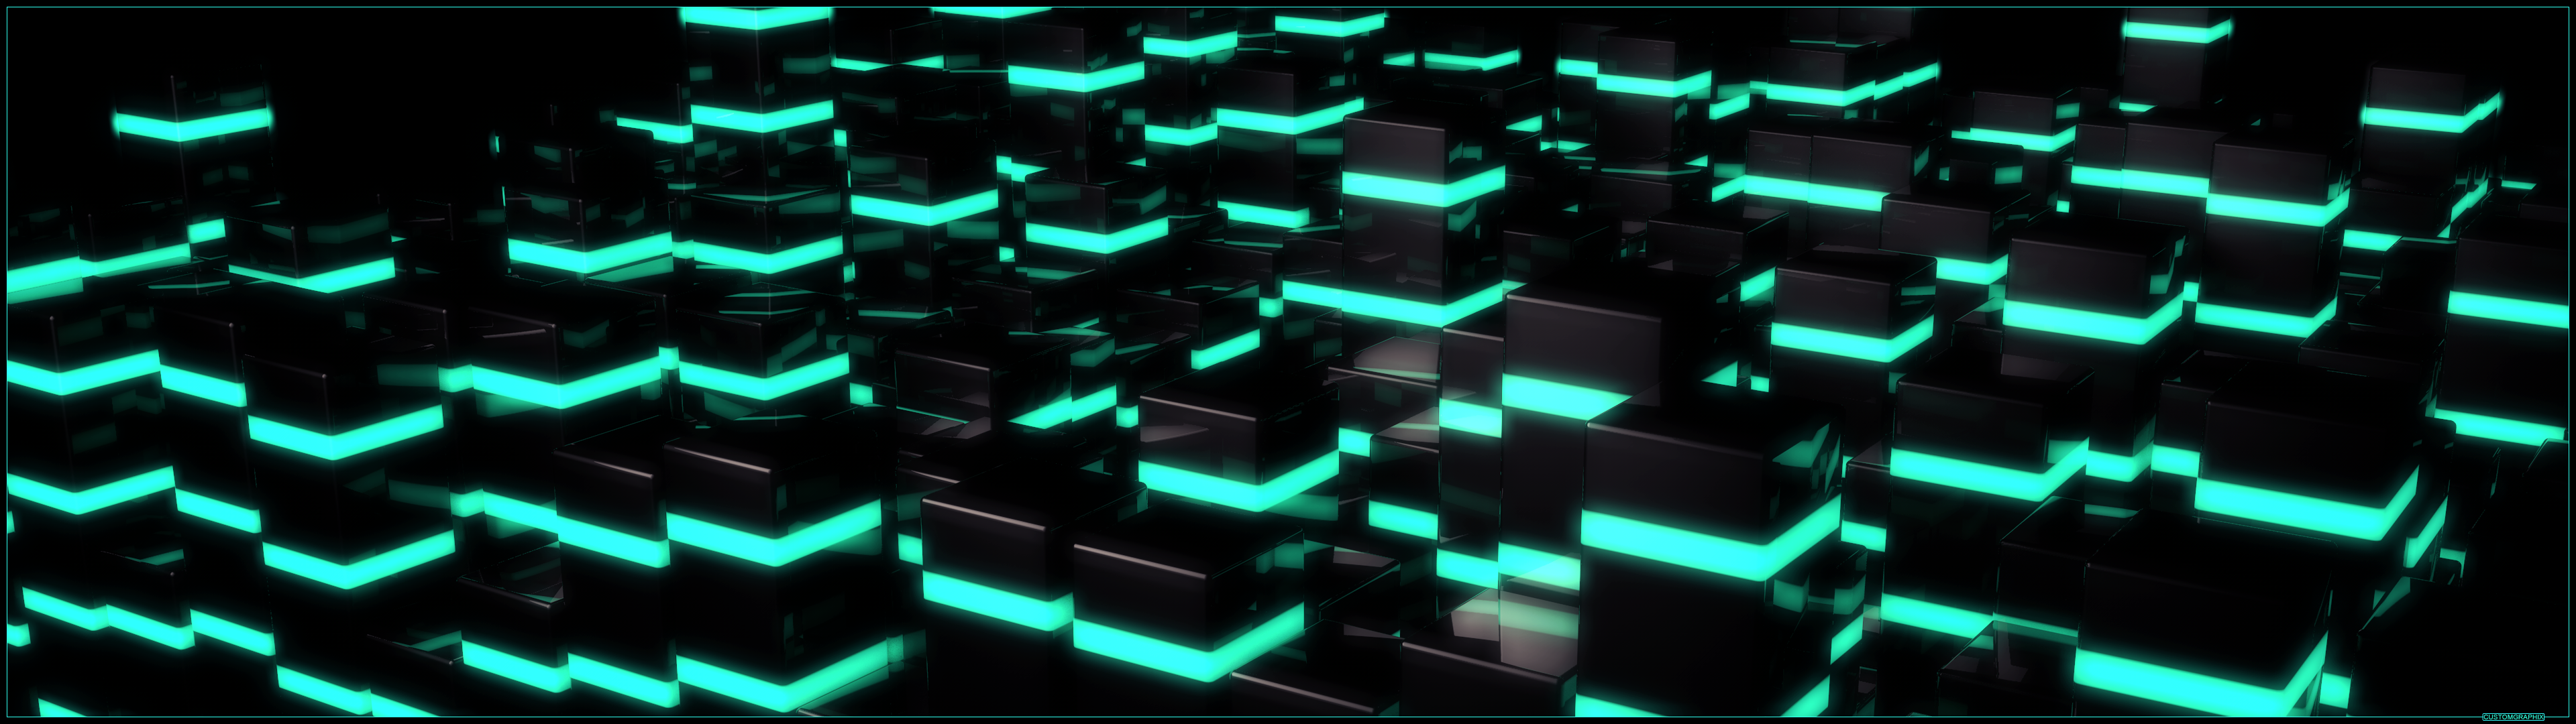 Abstract C4D Dualscreen wallpaper 3840x1080 by xCustomGraphix on 3840x1080